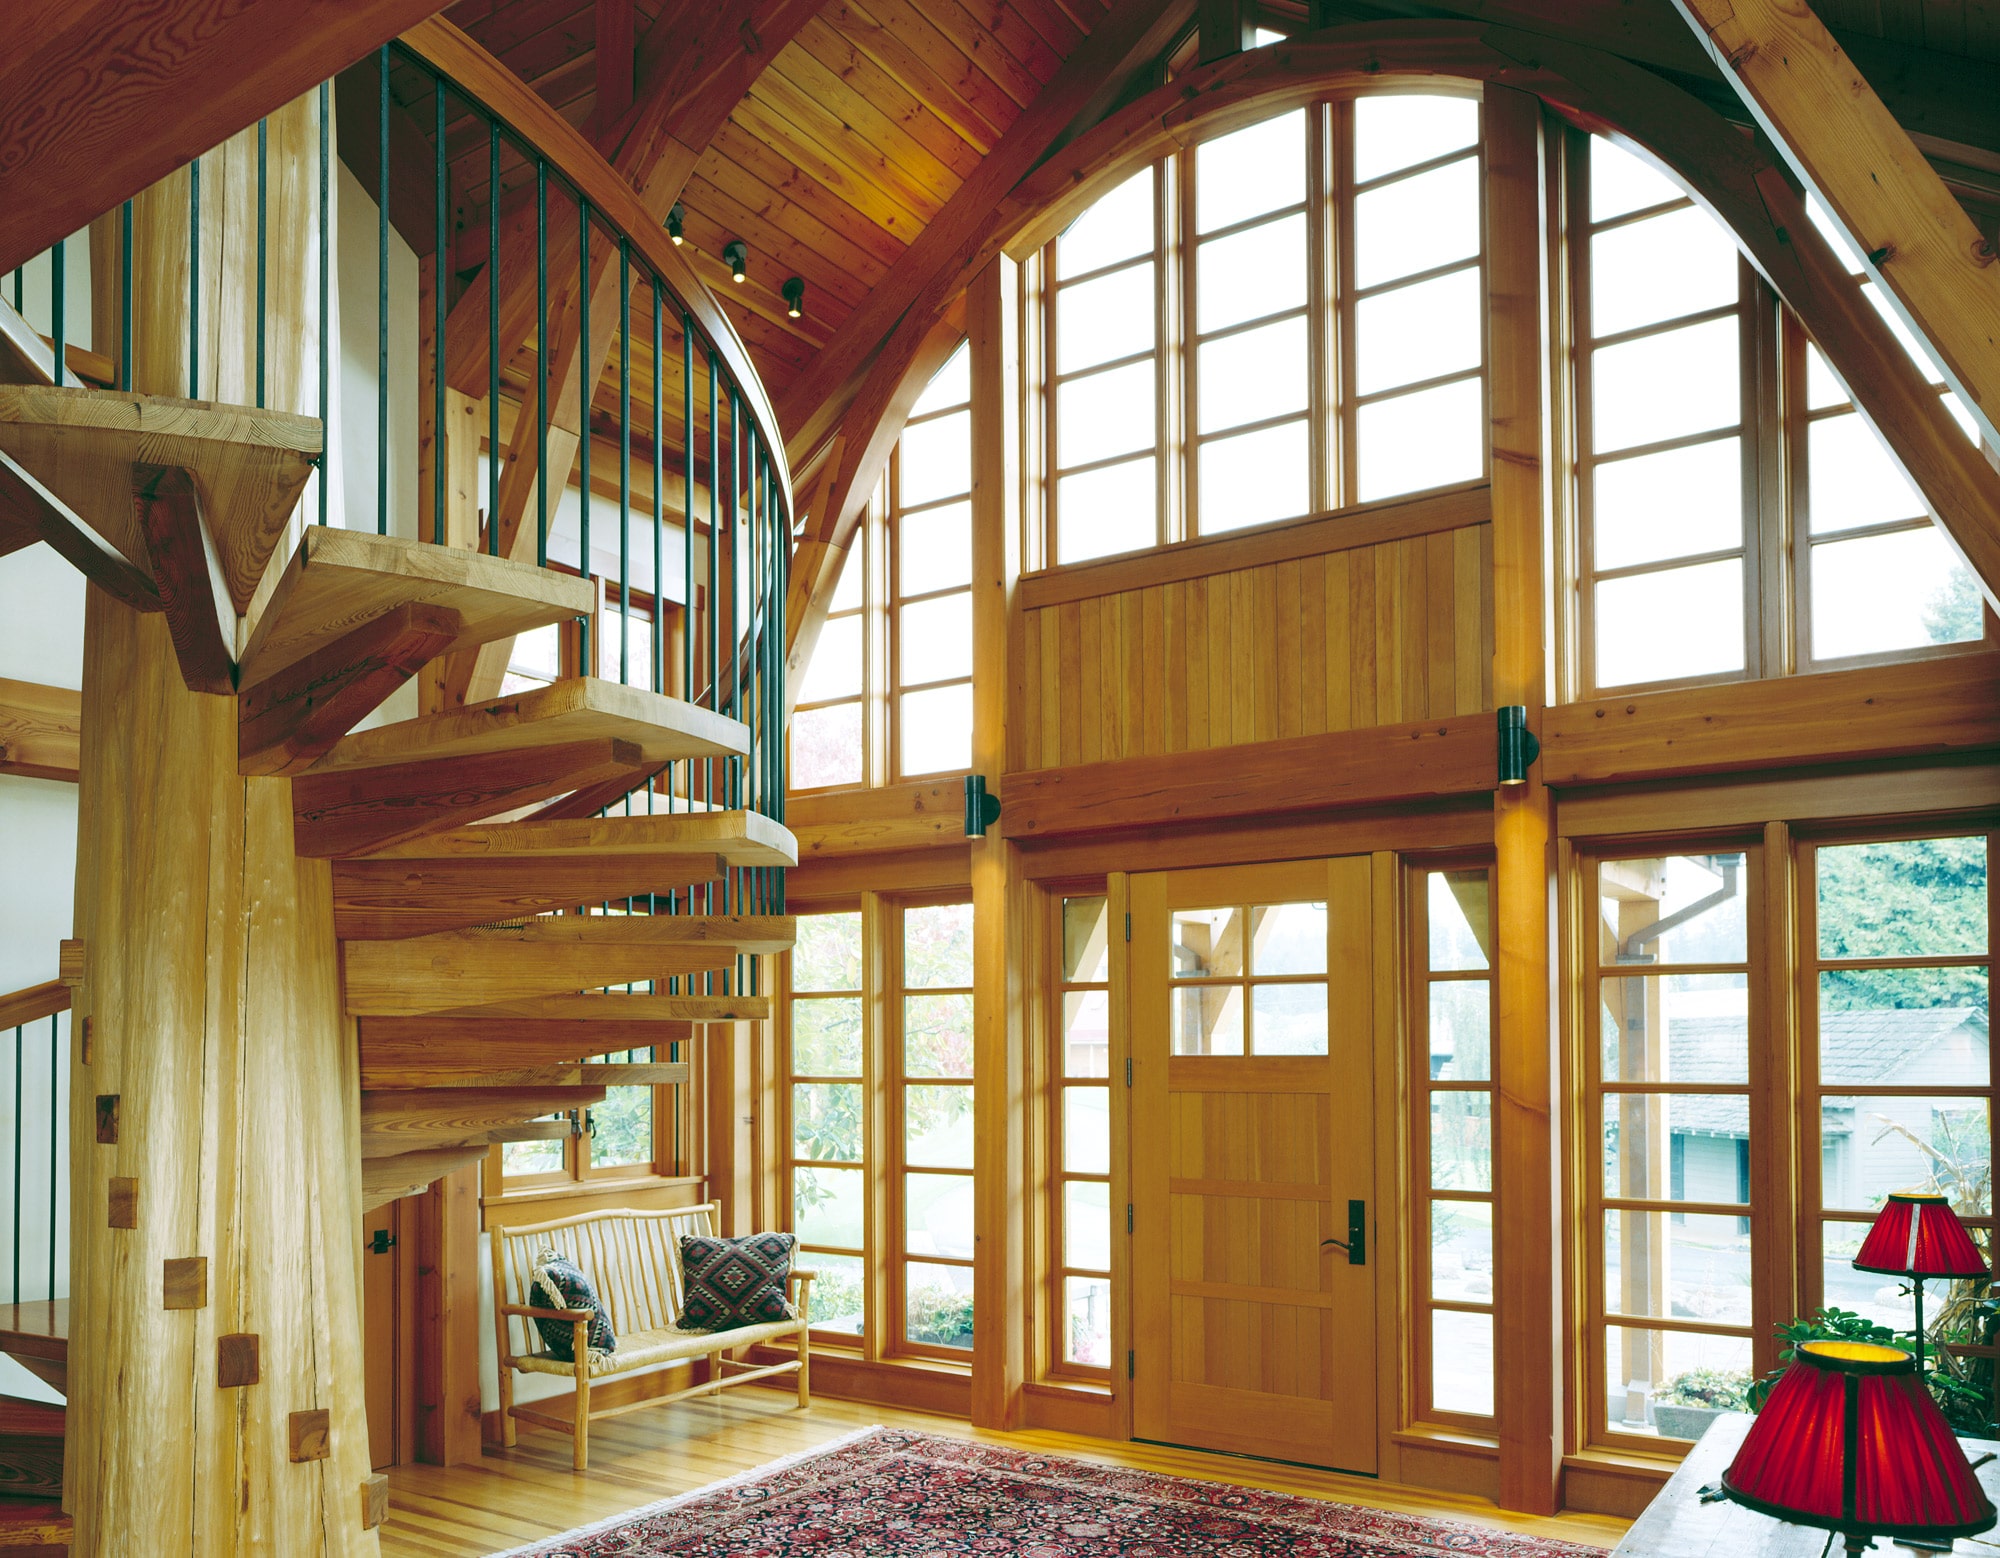 Timber Frame Homes Come With Beautiful Benefits